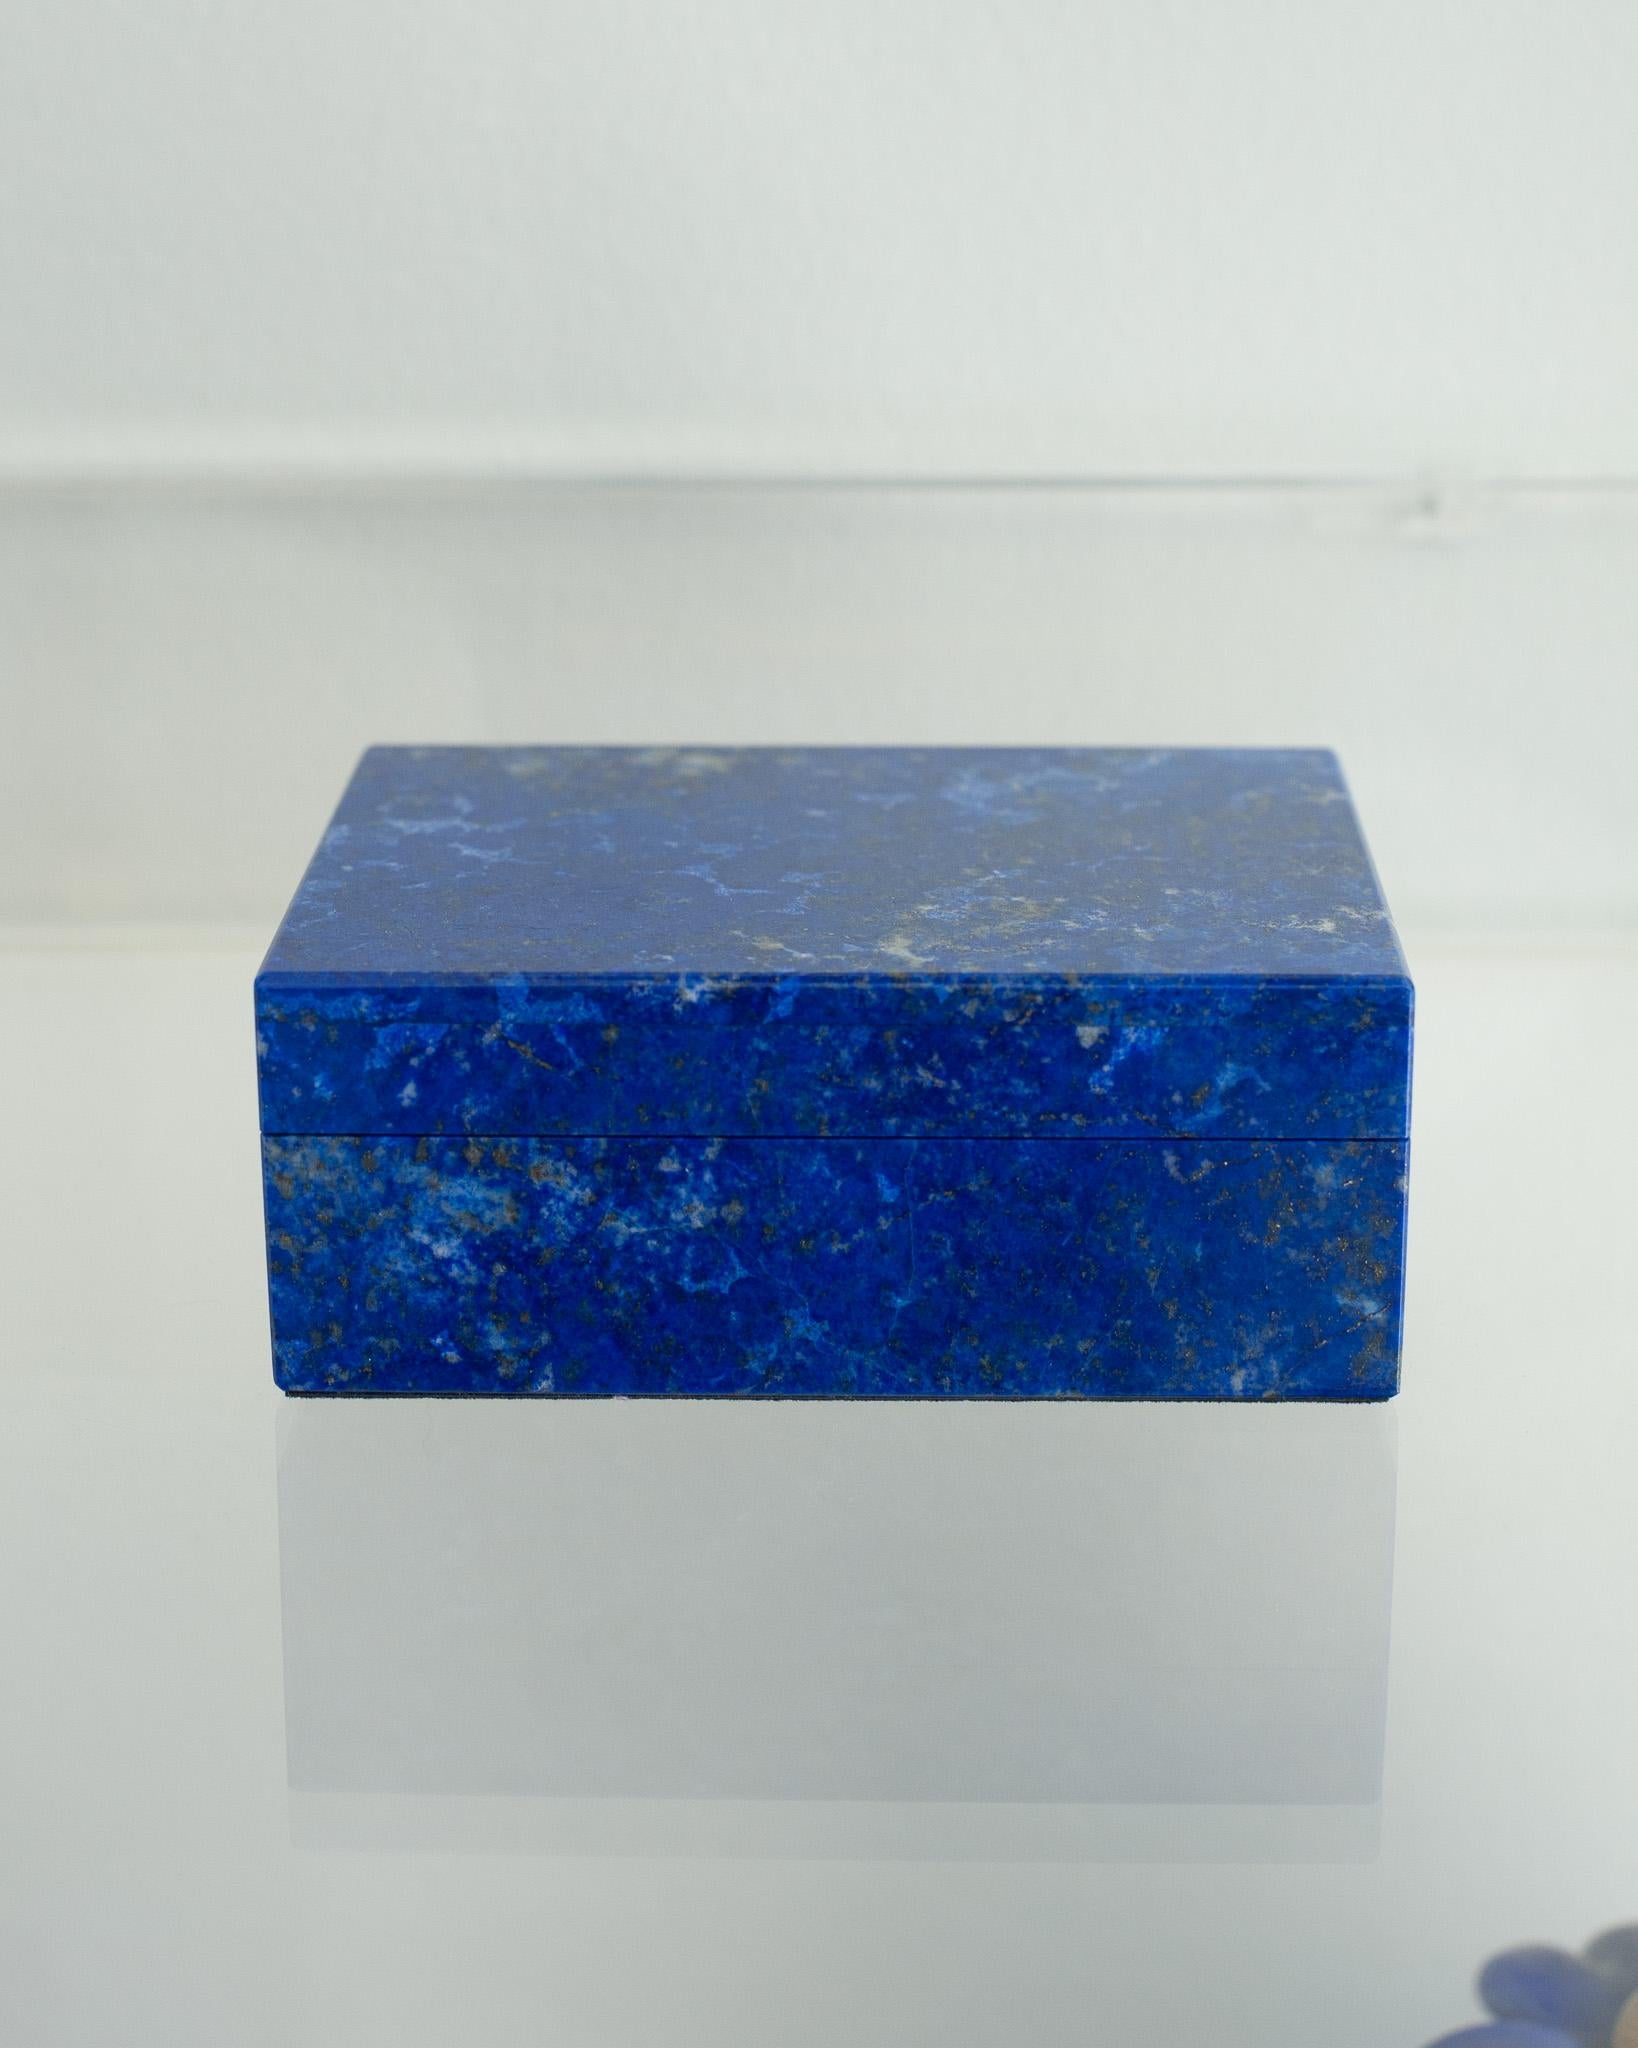 Invite healing energy into your home with an exquisite small vivd blue lapis box. This box is beautifully made with a hinged lid and expert construction. Lined in black velvet with black marble trims. Finished to a high polish to show off the